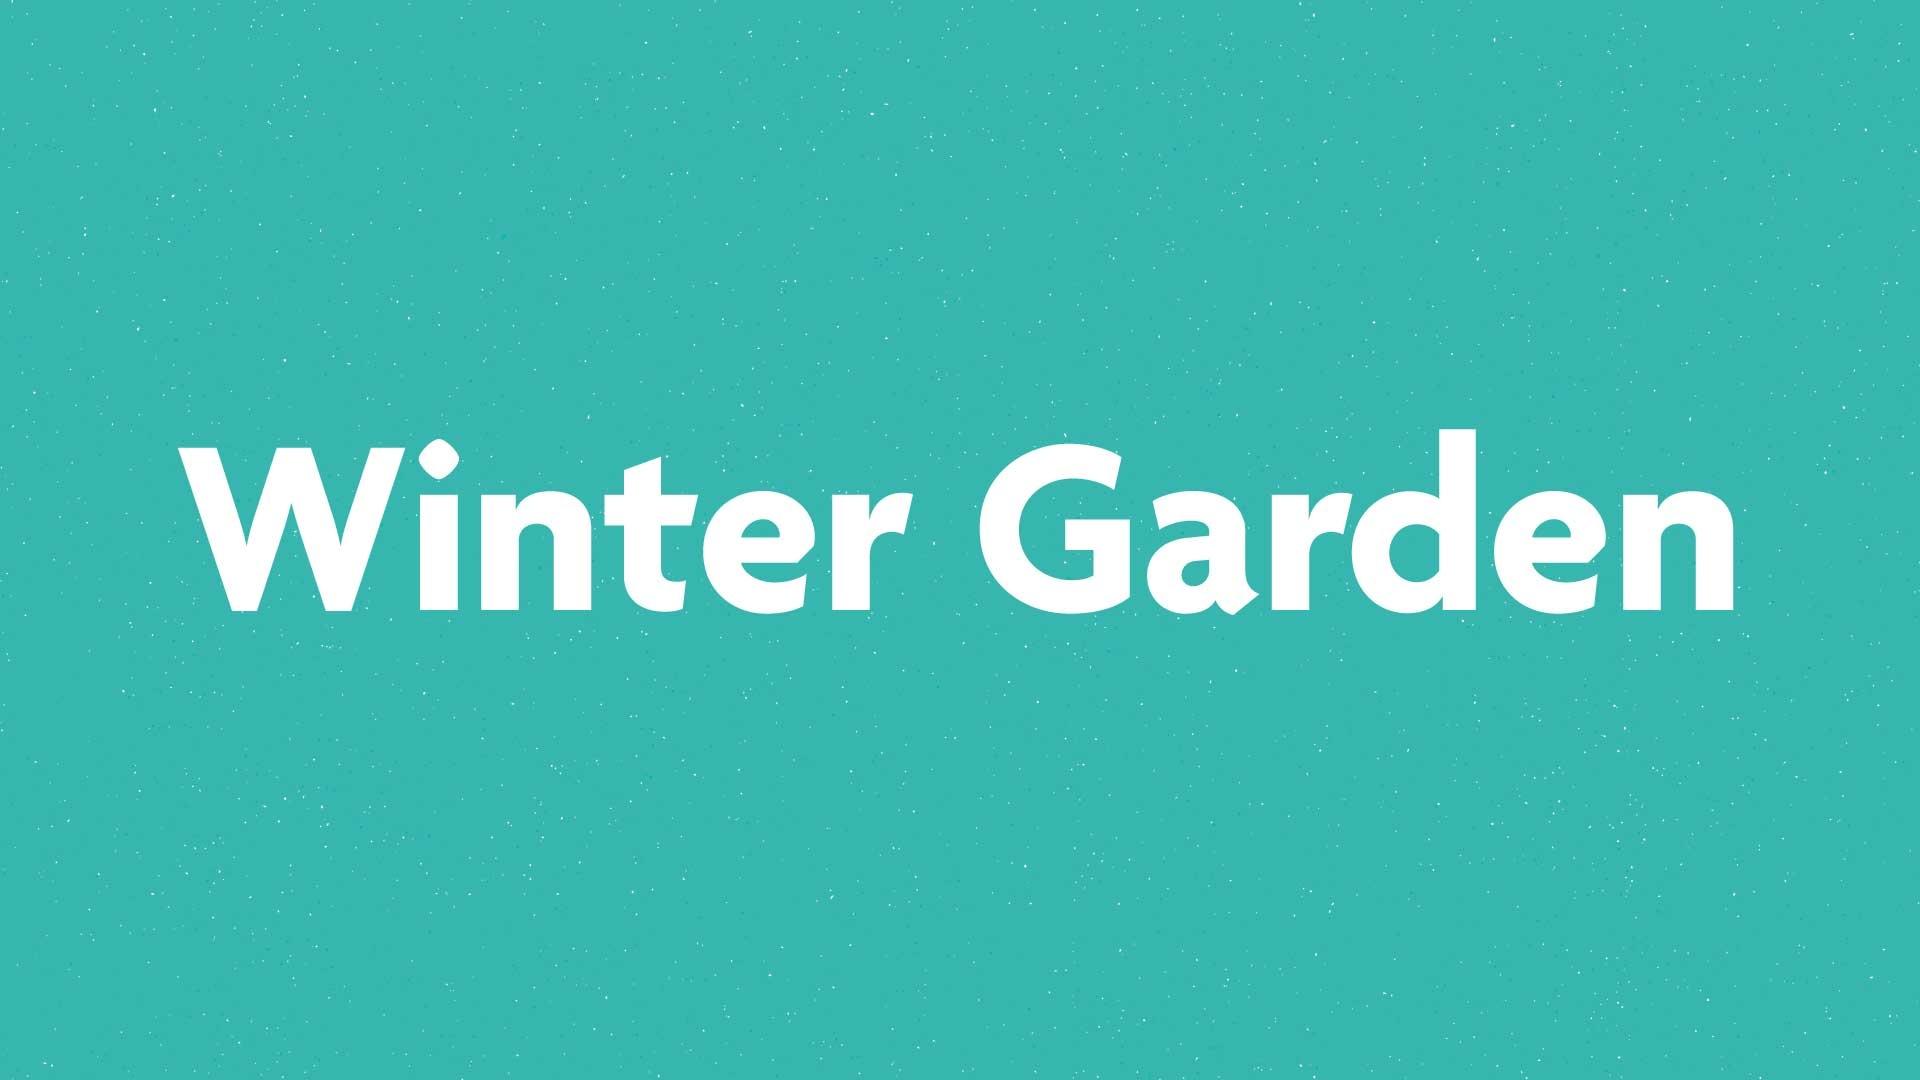 Winter Garden book submission card on a green background.